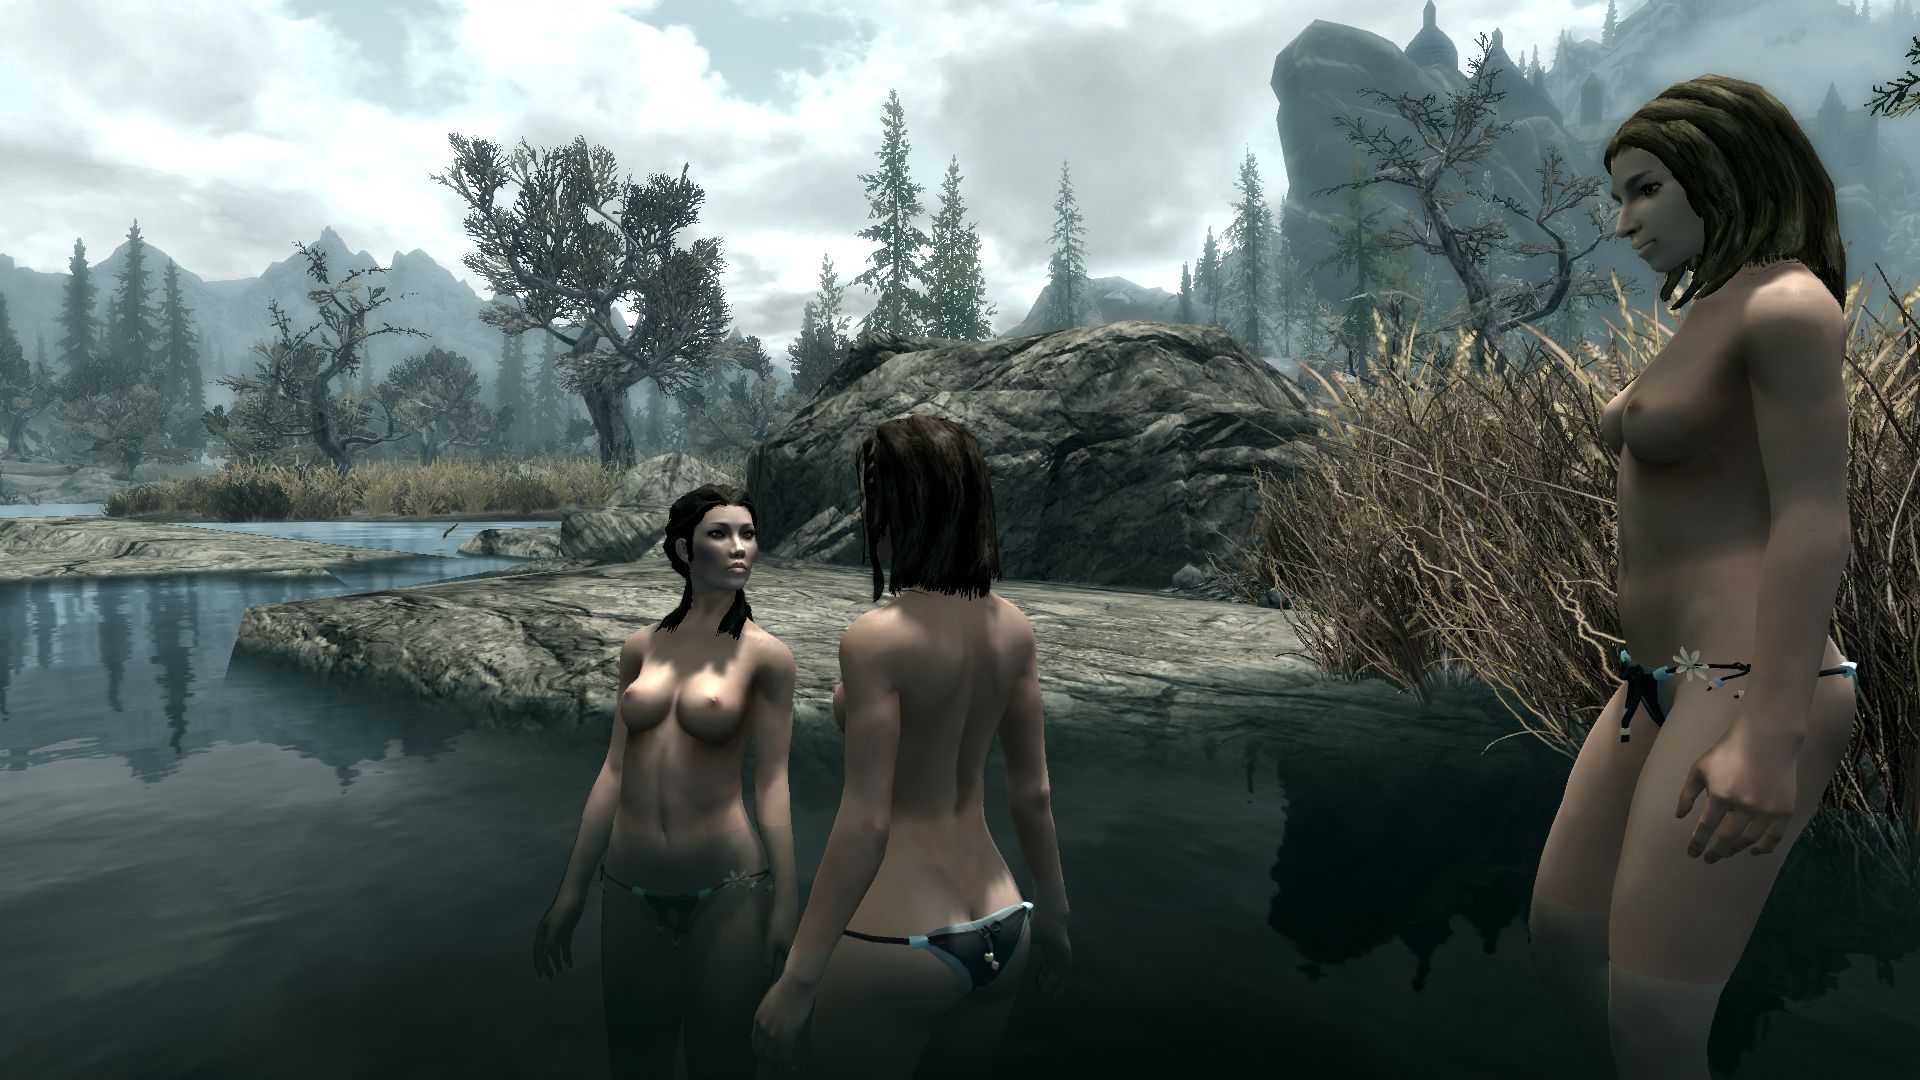 Required by all CB++ outfit packages. http://skyrim.nexusmods.com/mods/2525...